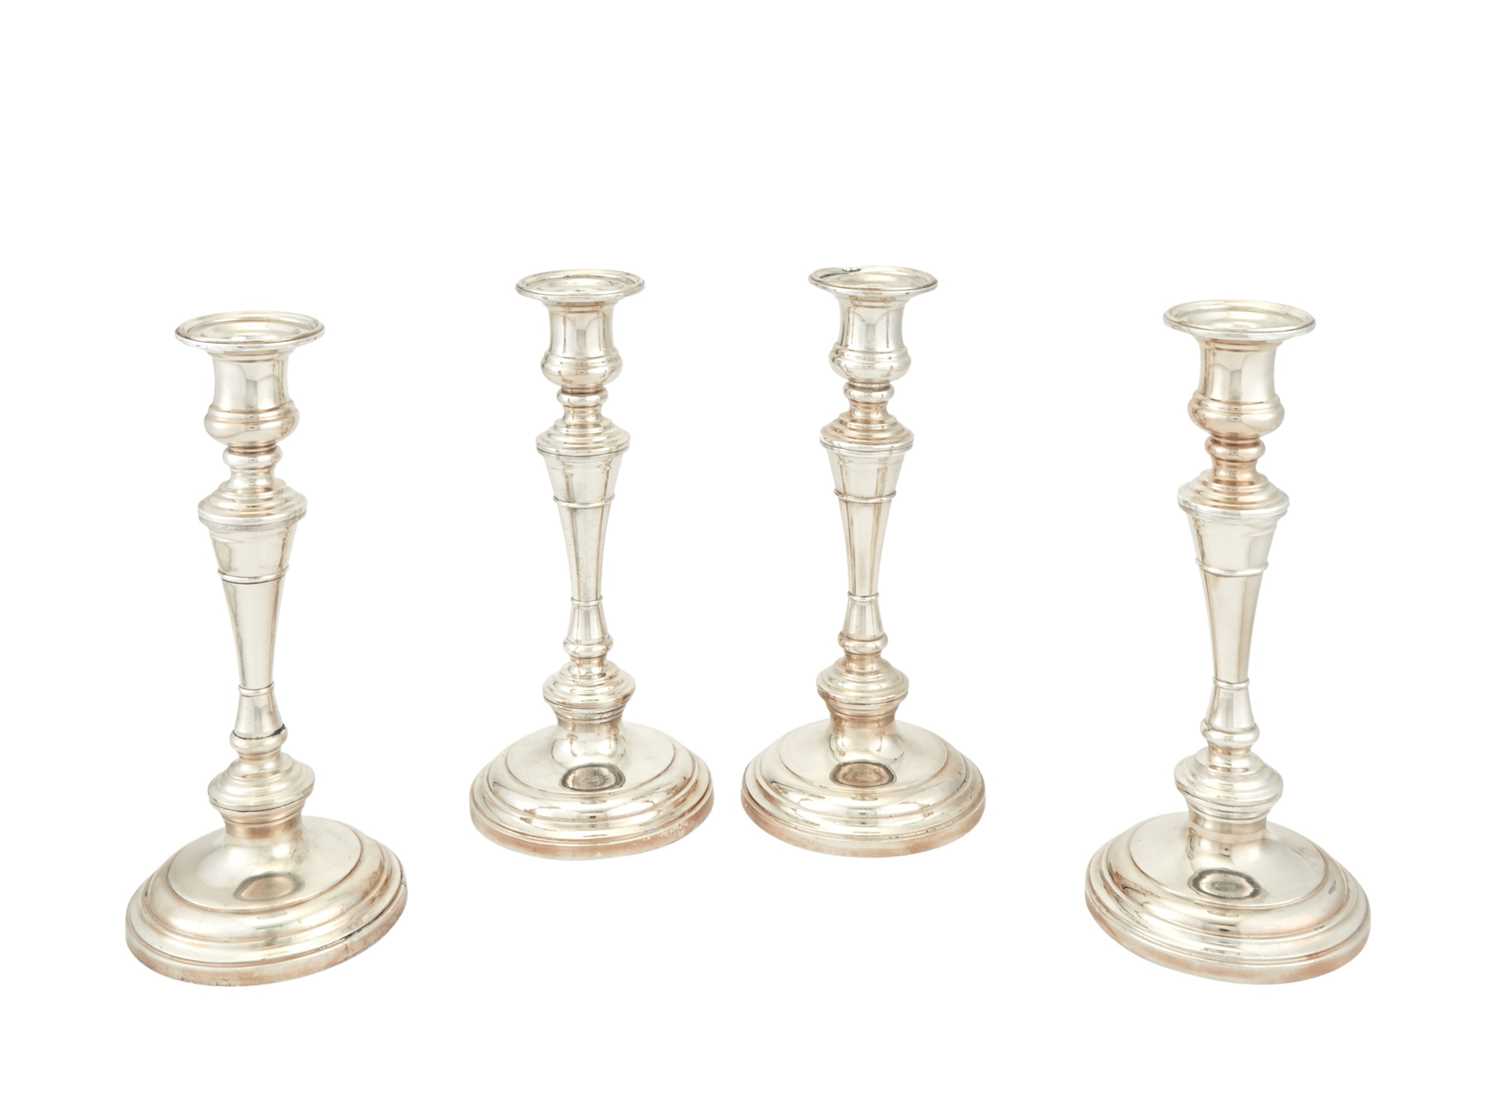 Lot 229 - Set of Four S. Kirk & Son Sterling Silver Candlesticks